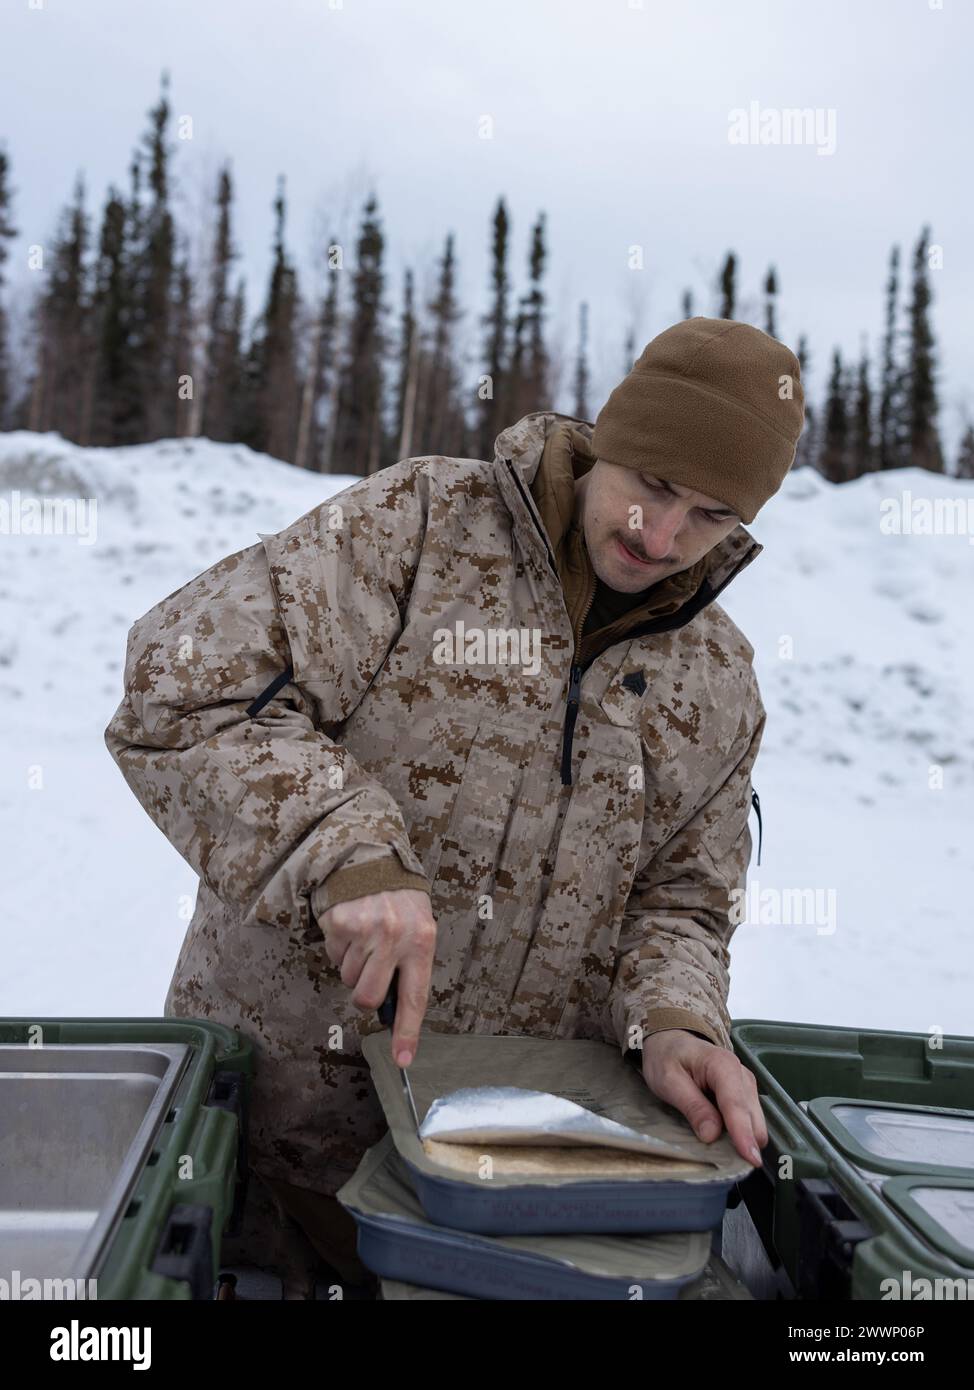 U.S. Marine Corps Sgt. Andrew Wood, a food service specialist with Fox Battery, 2nd Battalion, 14th Marine Regiment, 4th Marine Division, Marine Forces Reserve prepares chow for Marines in support of exercise Arctic Edge 2024 (AE24) on Eielson Air Force Base, Alaska, Feb. 23, 2024. Wood served as the only food service specialist for the duration of the exercise. AE24 is a U.S. Northern Command-led homeland defense exercise demonstrating the U.S. military’s capabilities in extreme cold weather, joint force readiness, and U.S. military commitment to mutual strategic security interests in the arc Stock Photo